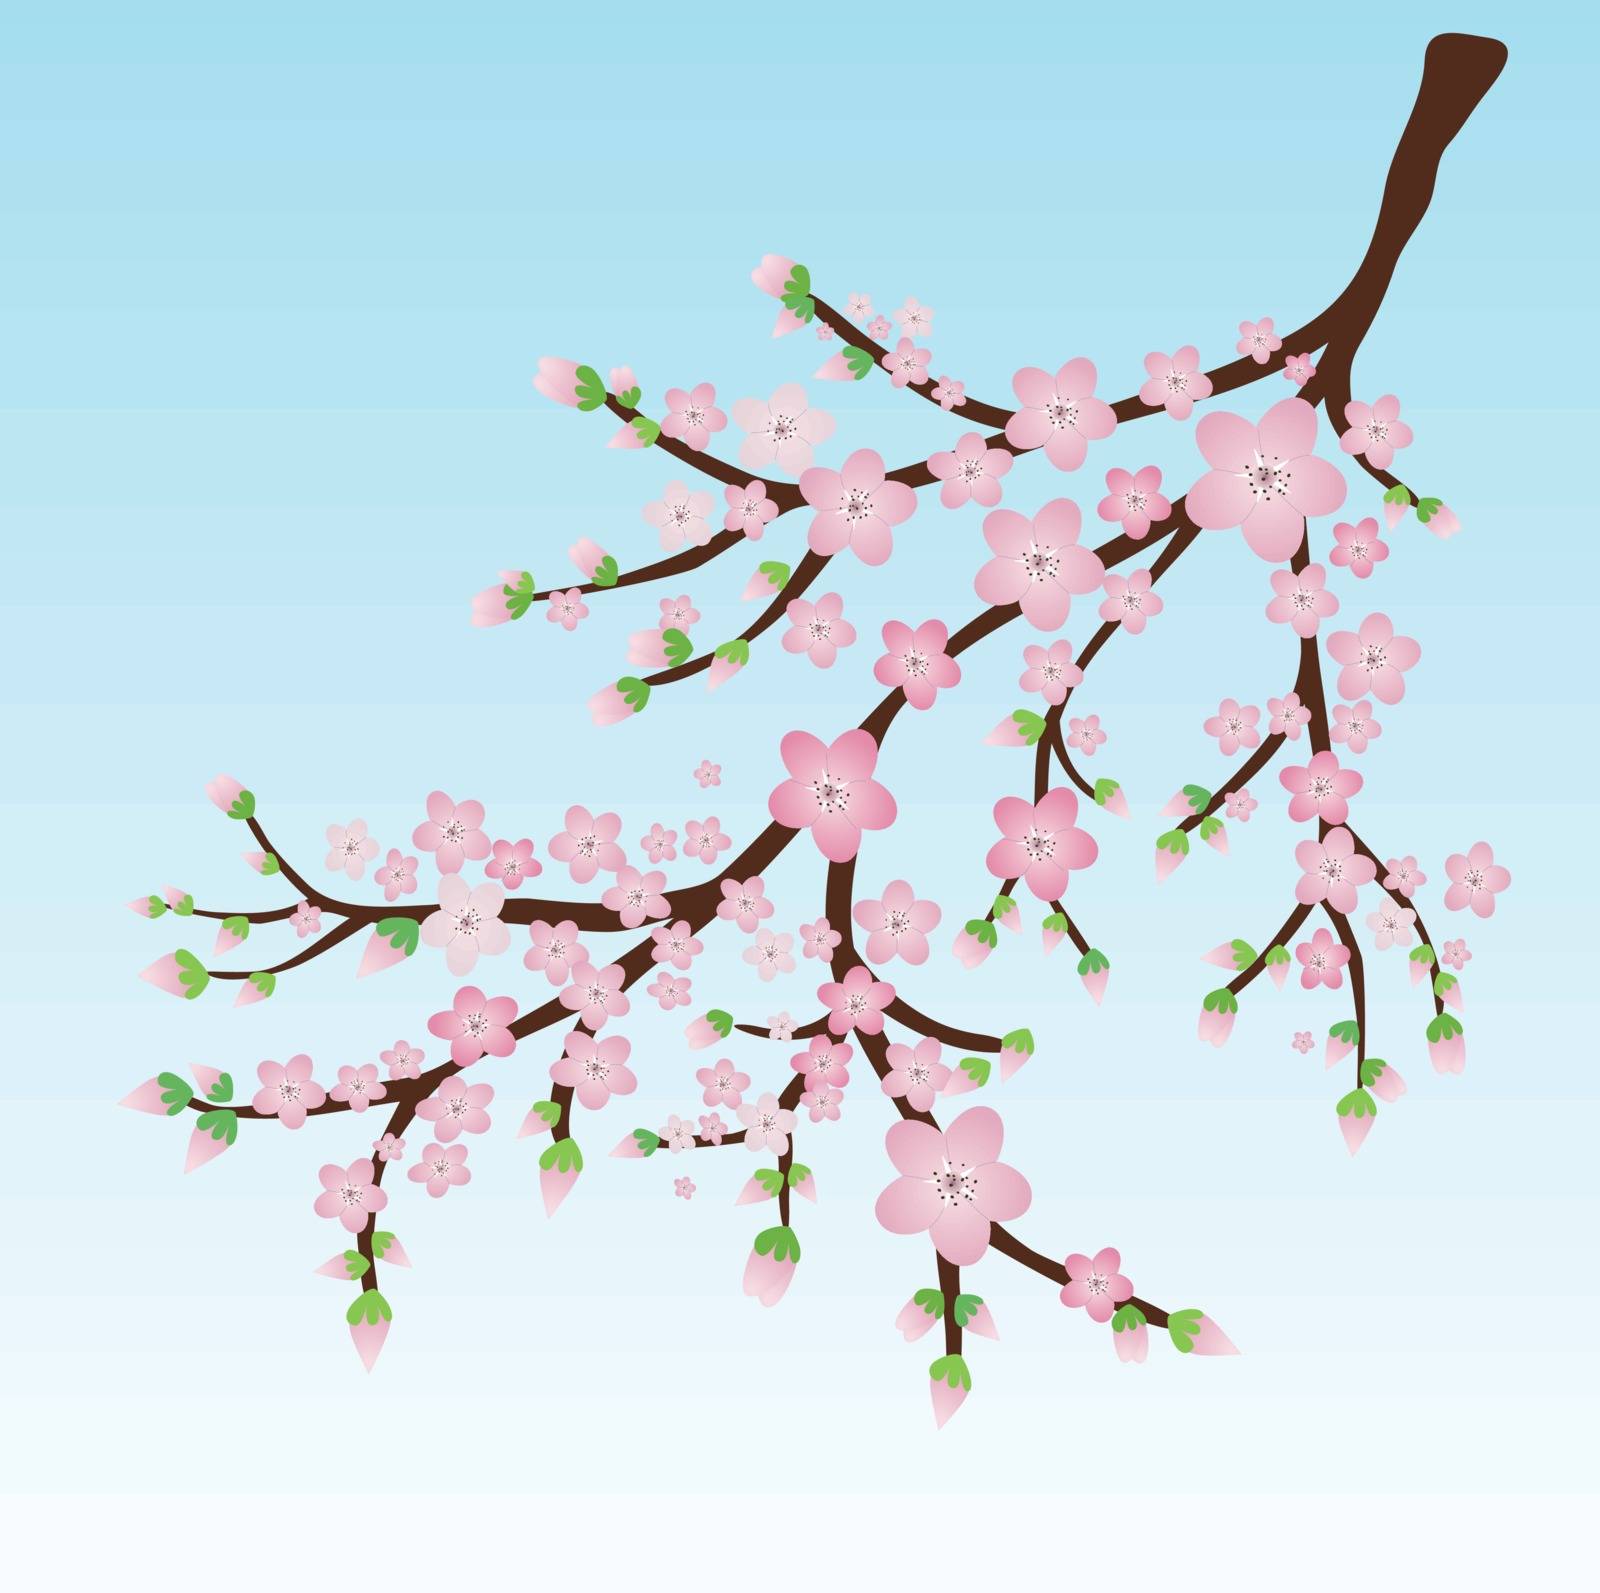 A vector illustration af a branch with pink blossoms and flower butts